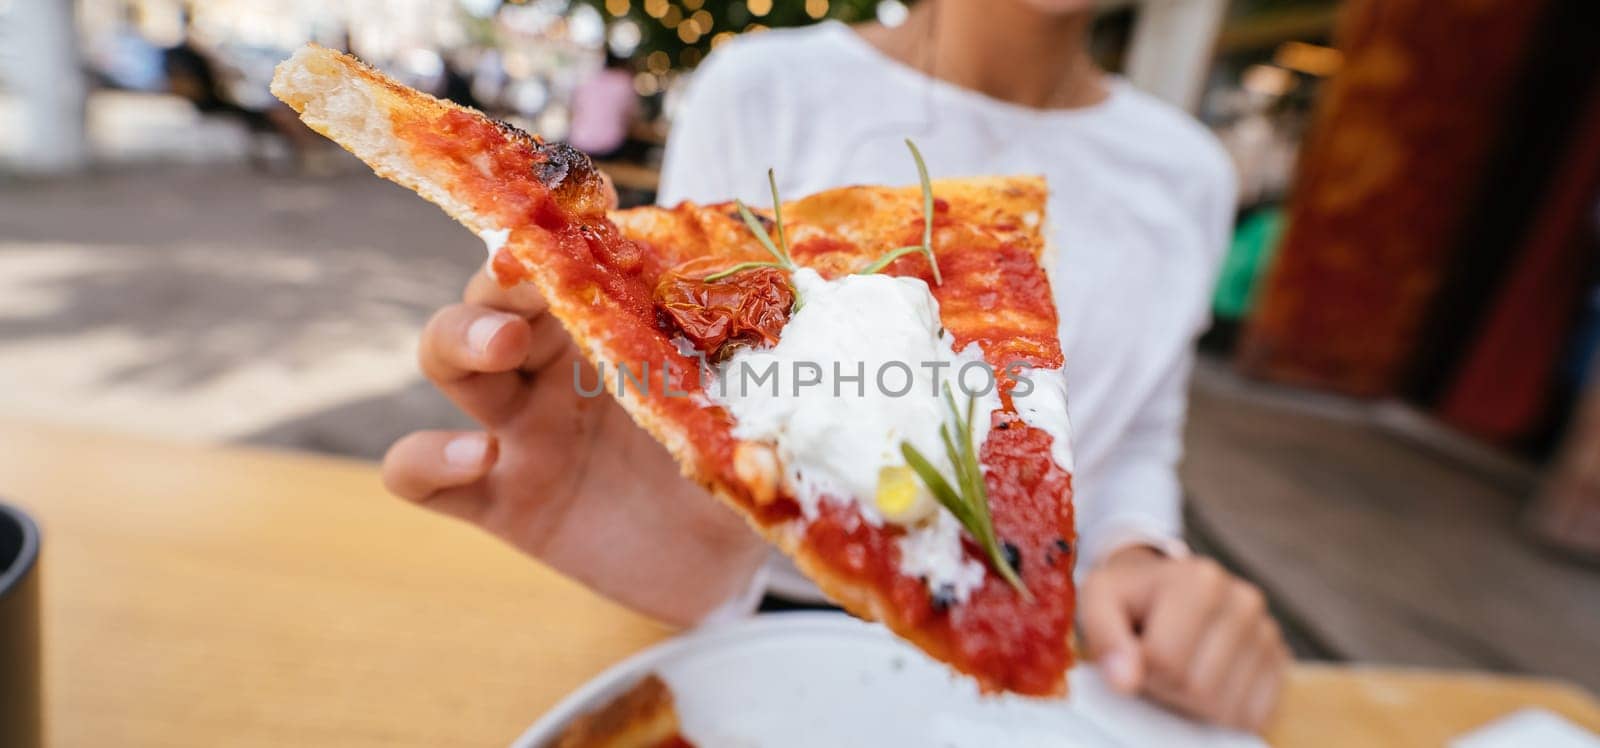 Woman's hand holding a slice of pizza outdoor on terrace.